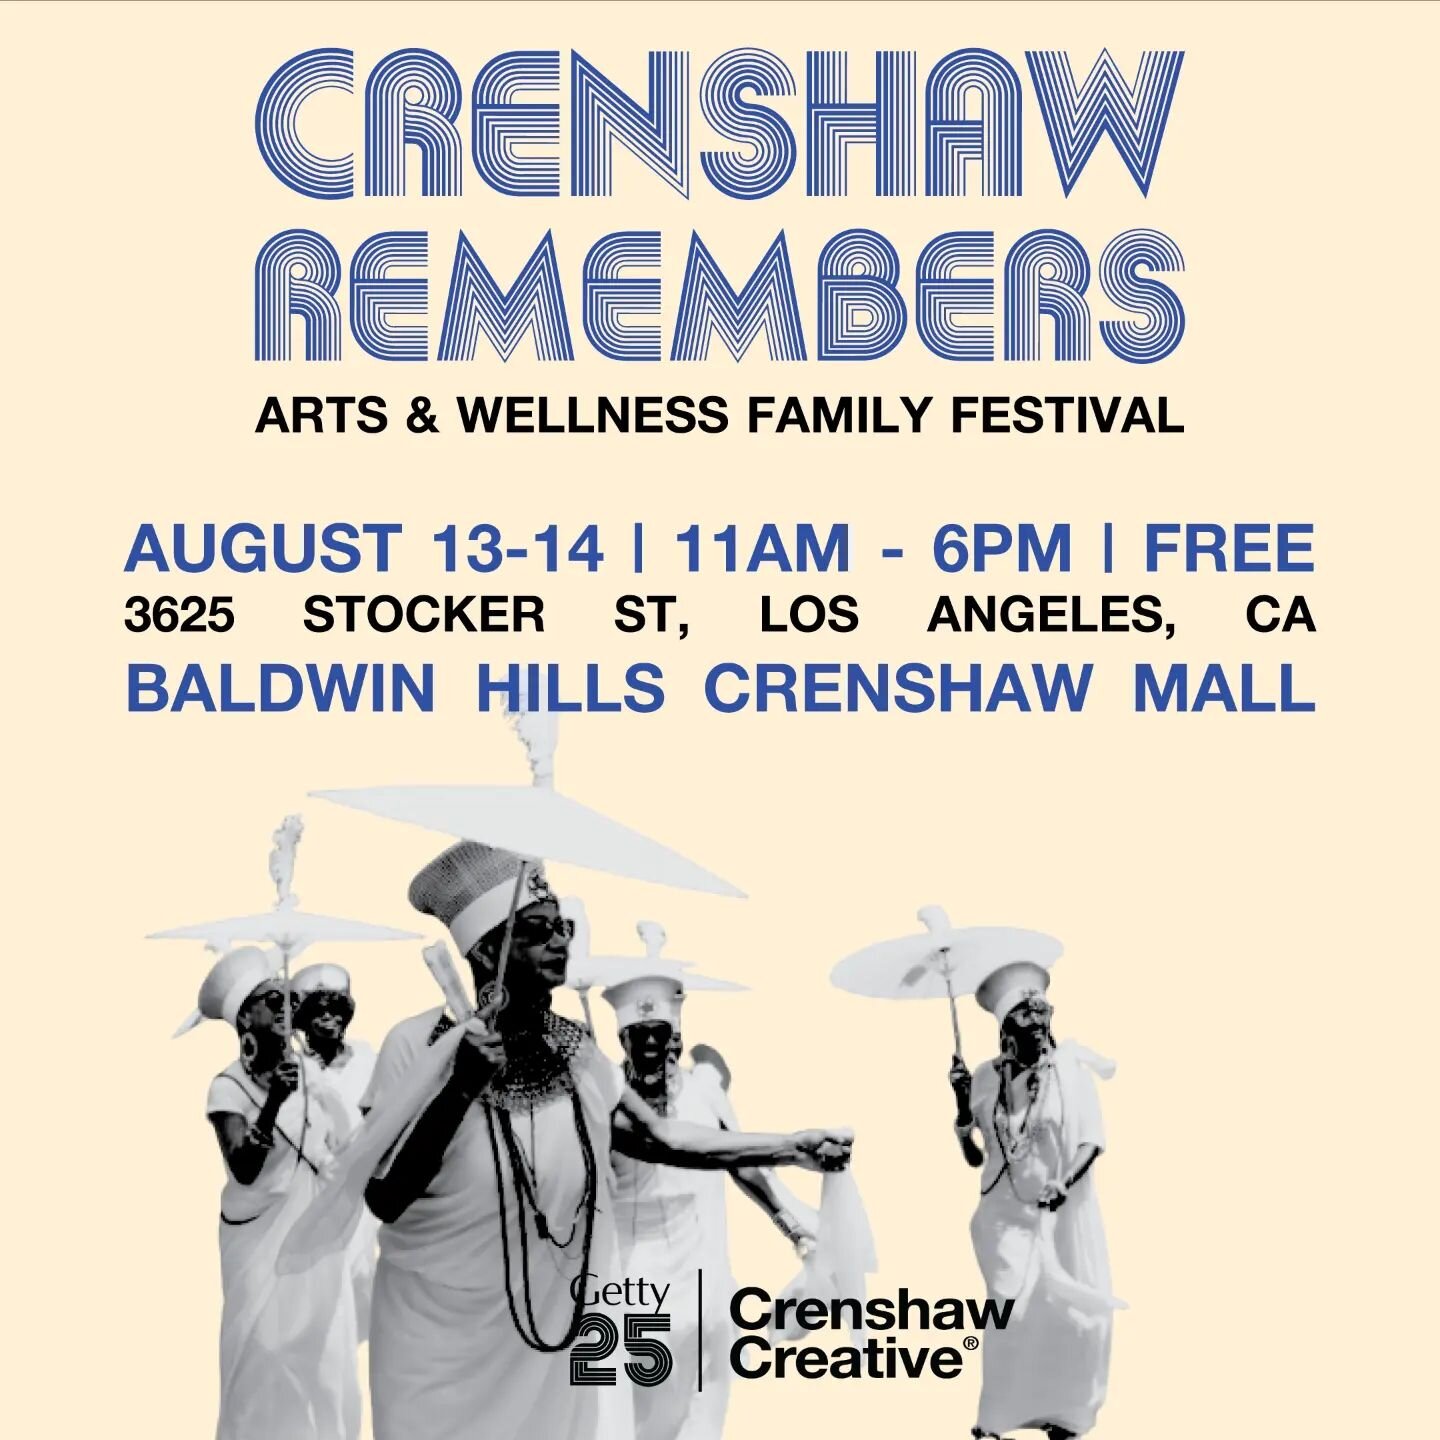 Crenshaw Remembers!!!
2 day festival--- Amazing Music,
Workshops, vendors etc.
SoLA Food Co-op will be present distributing FREE--- Organic Grains &amp; Legumes
Yours truly will be teaching a Qi- Gong class Sunday @ 11:30
#neighborhoodlove #arts #mus